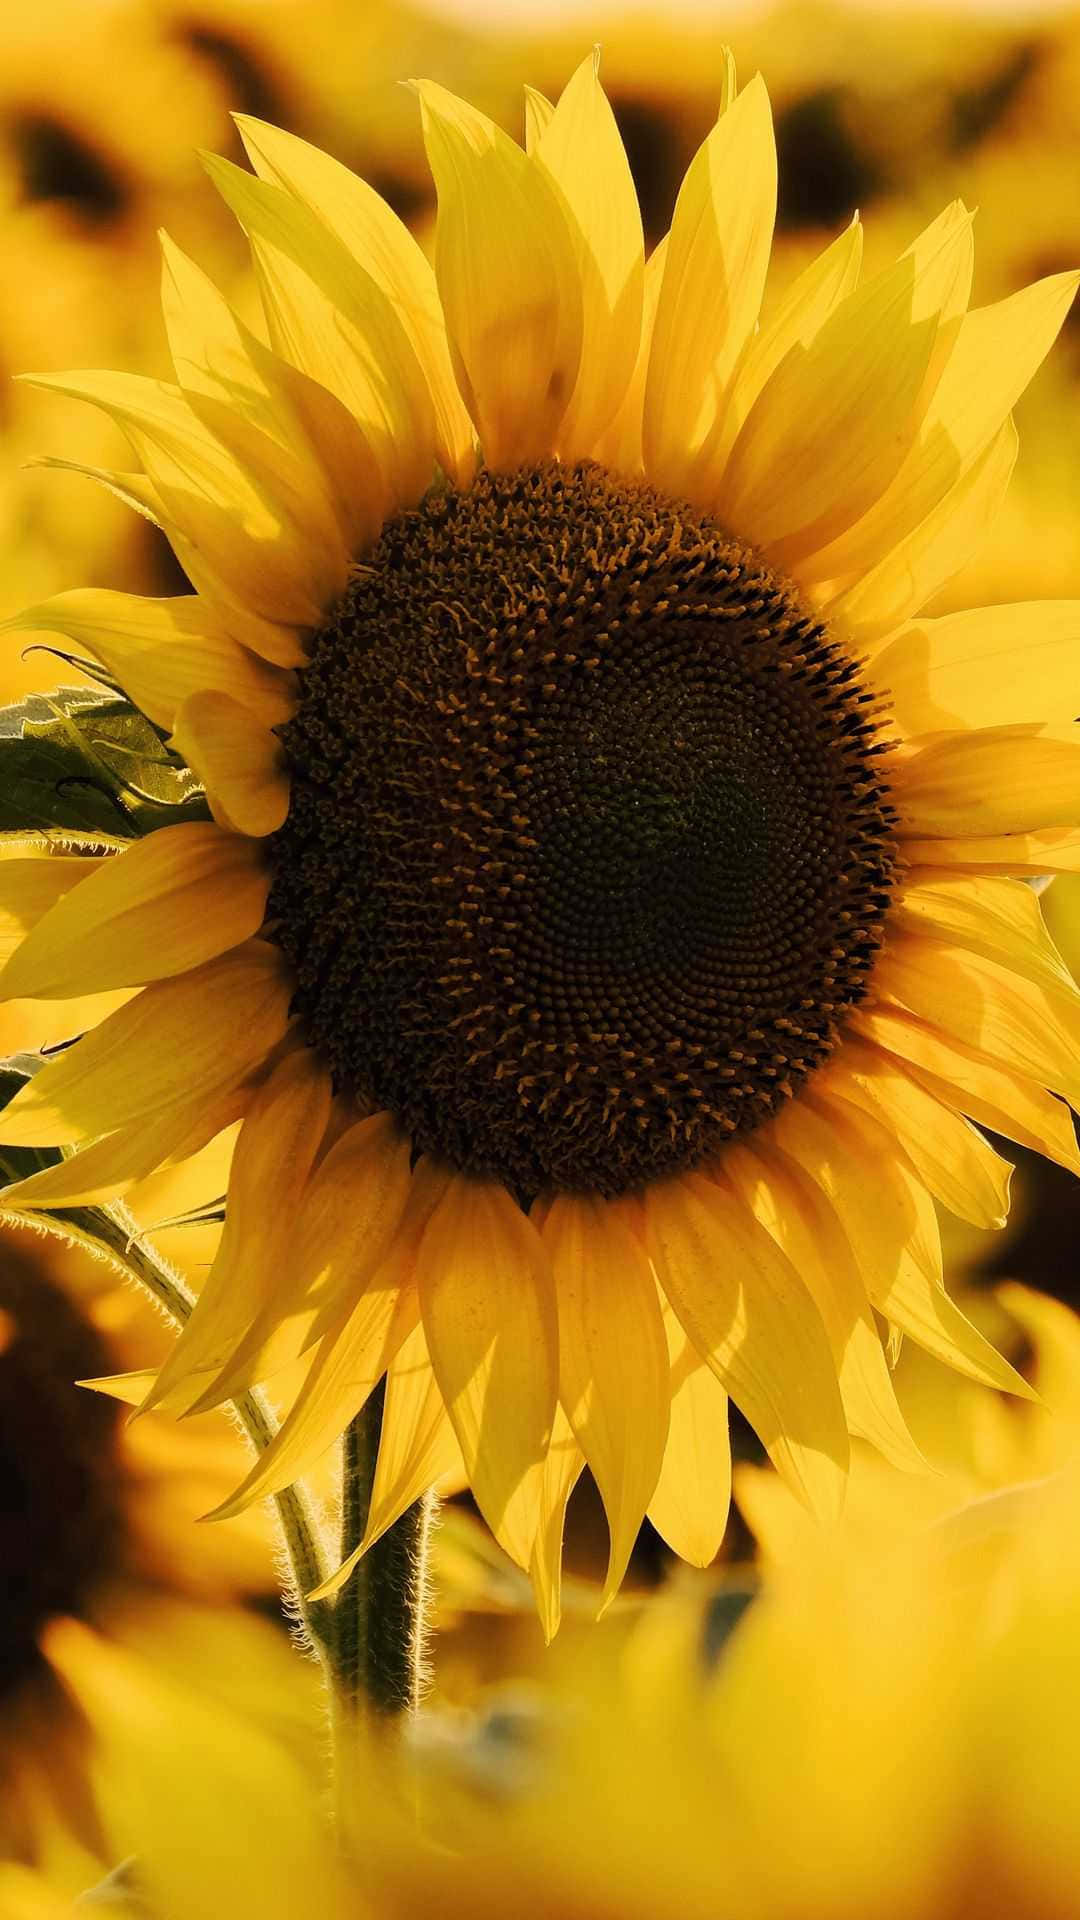 Sunflower standing proud and tall infront of a beautiful field of yellow wildflowers. Wallpaper